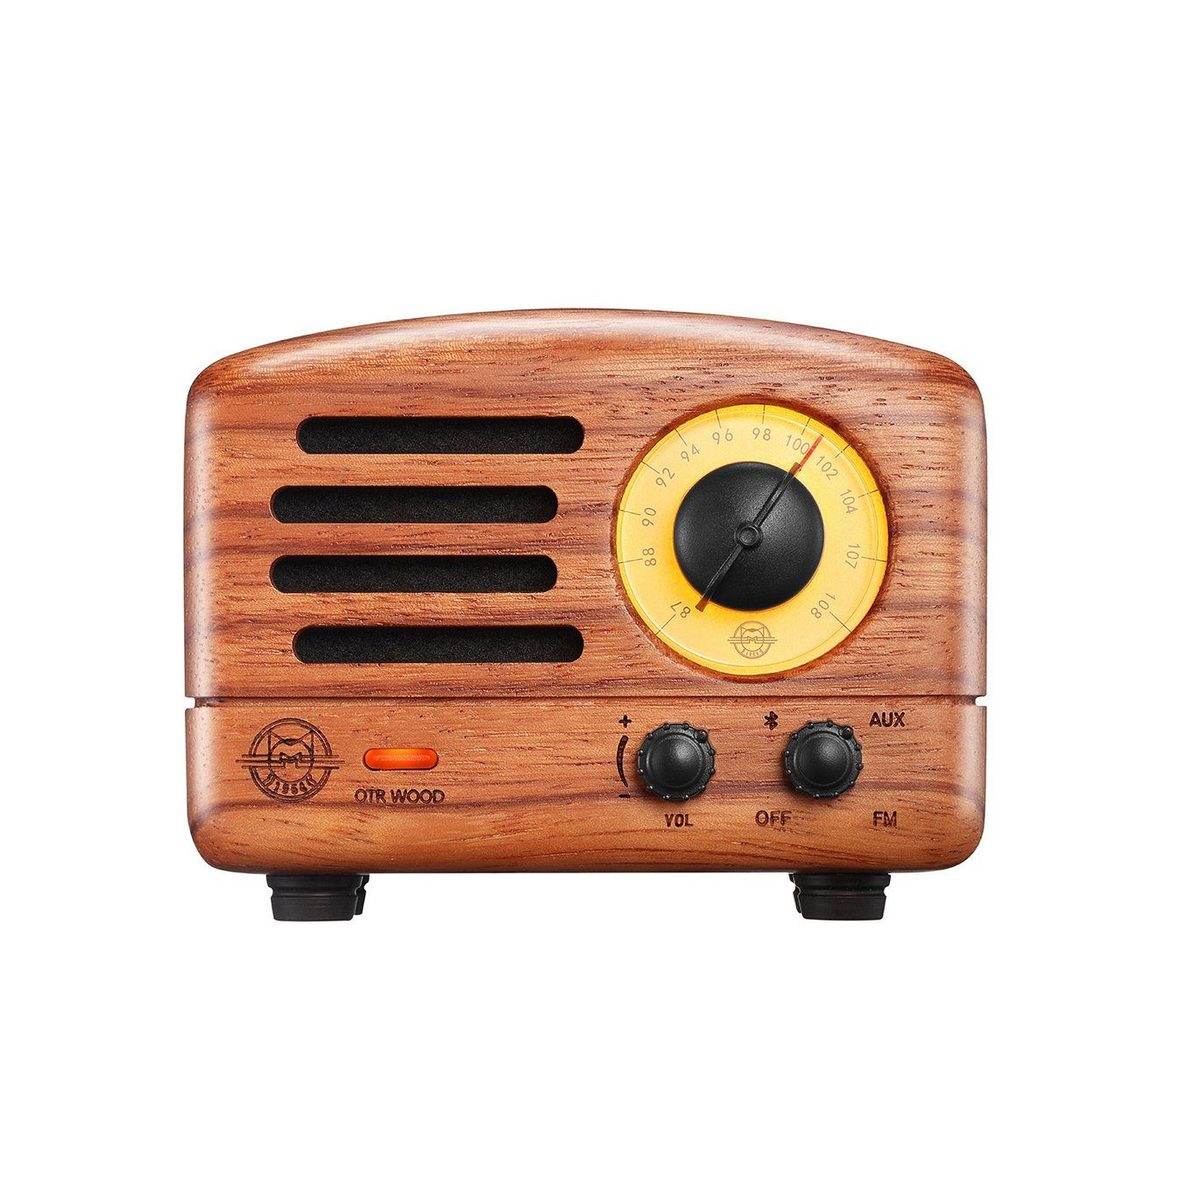 Wooden Bluetooth & FM Radio Speaker With Duffle Bag - Rosewood